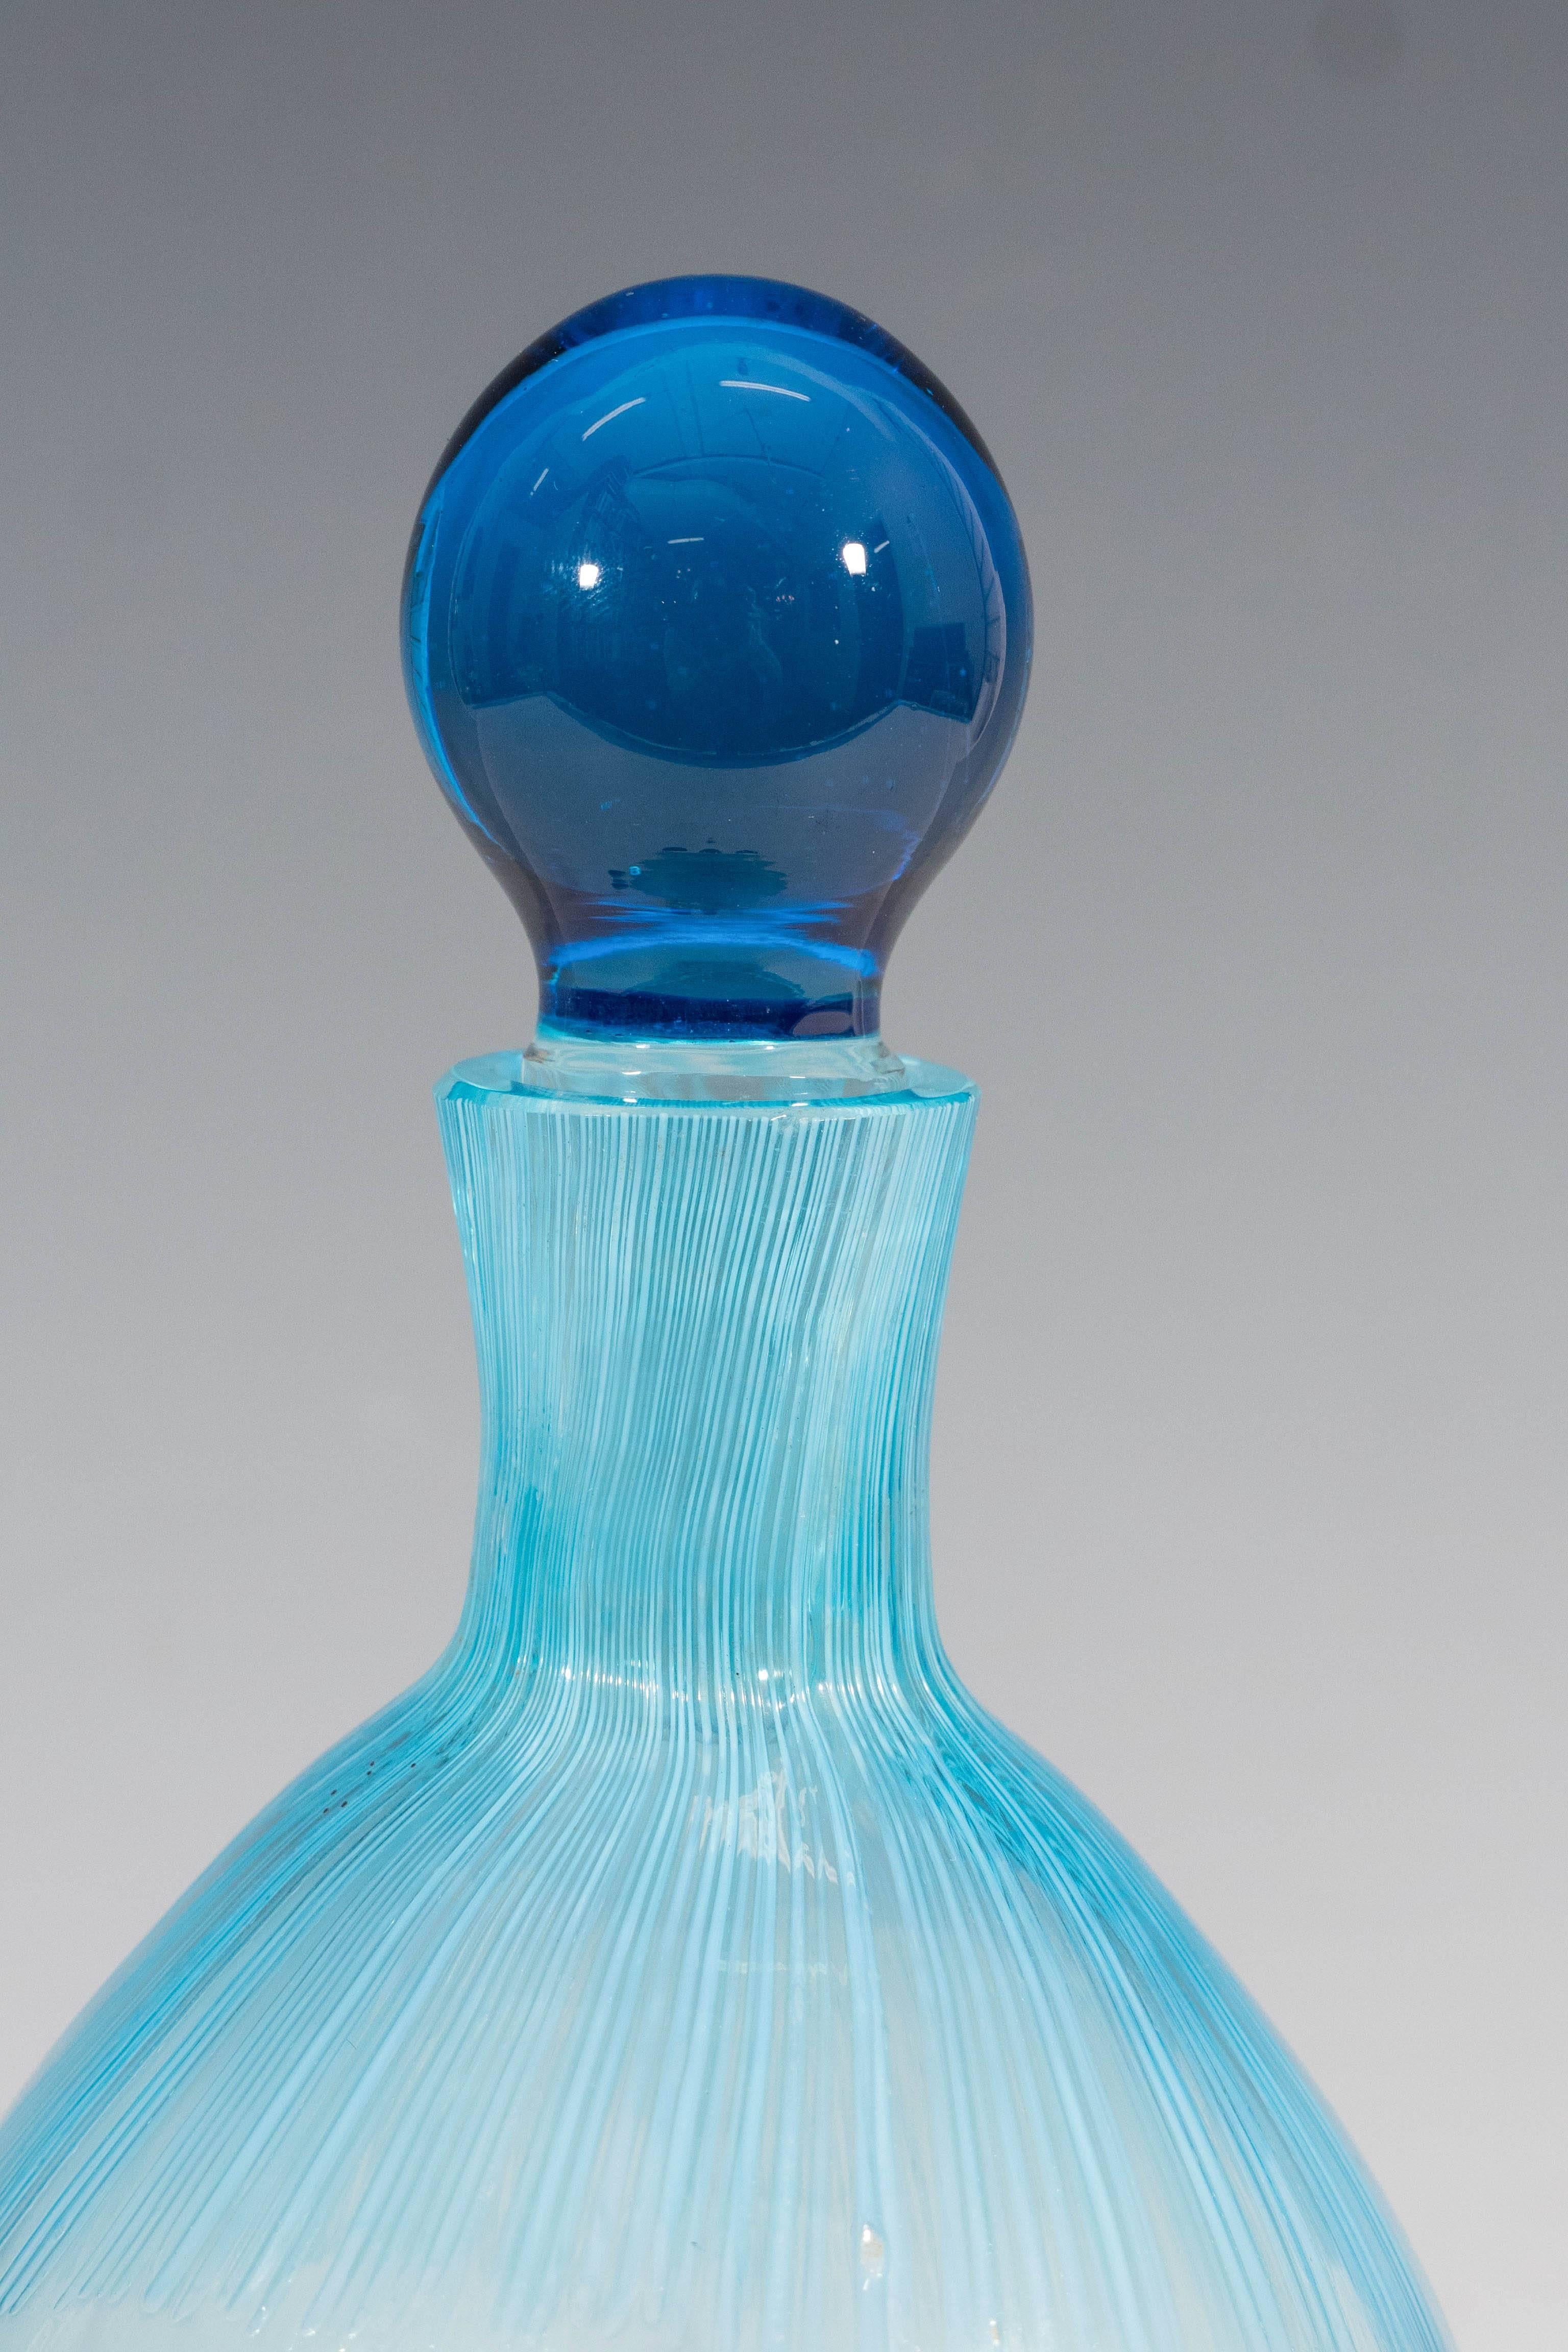 blue glass decanter made in italy